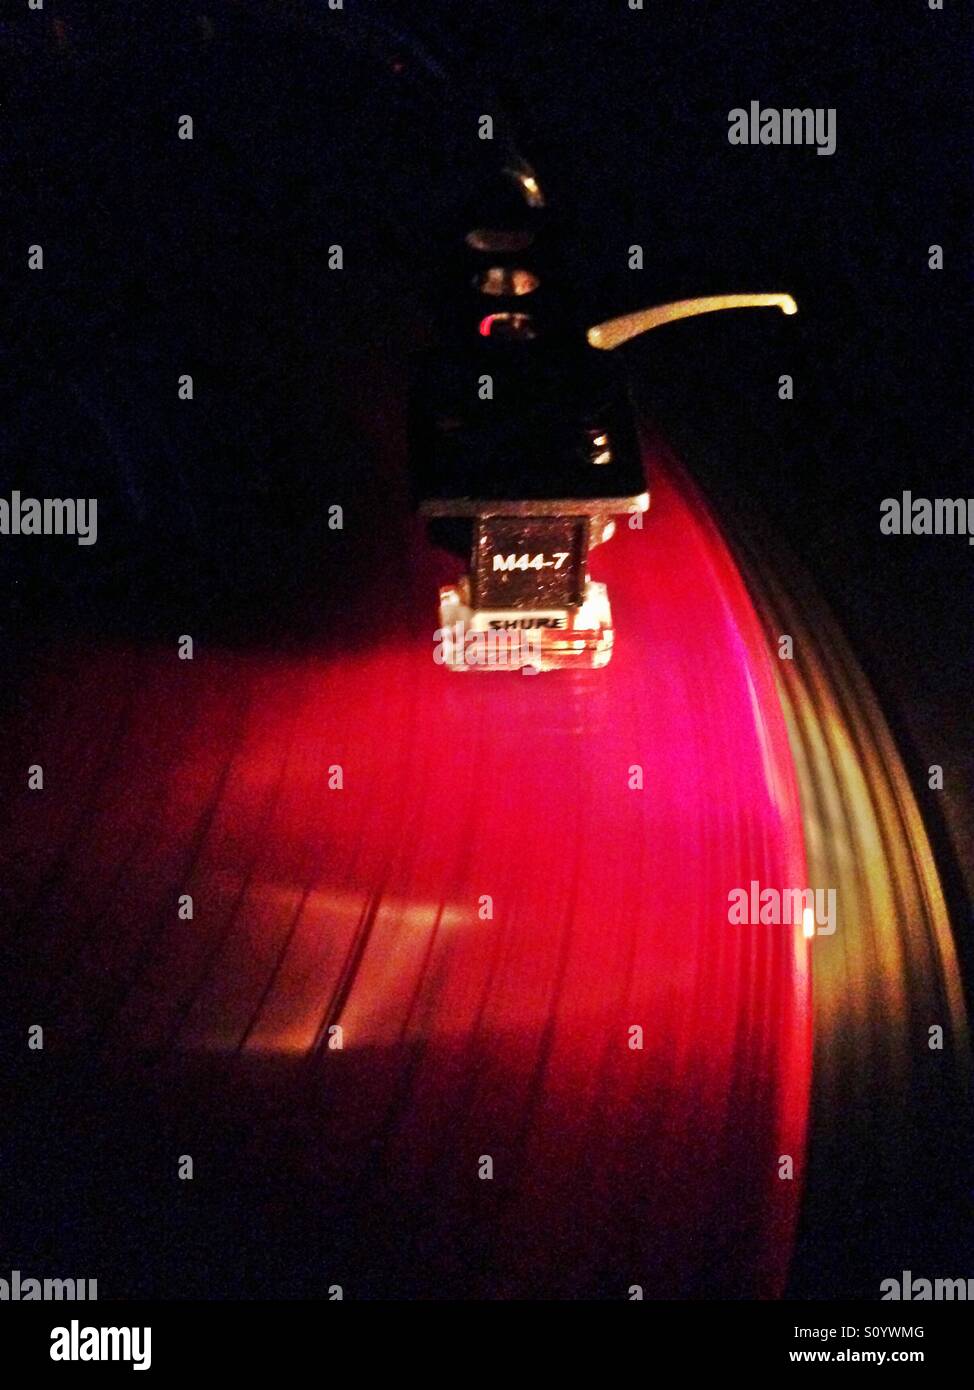 Red Vinyl playing on Technics SL1200 turntable with Shure M44-7a cartridge. Stock Photo